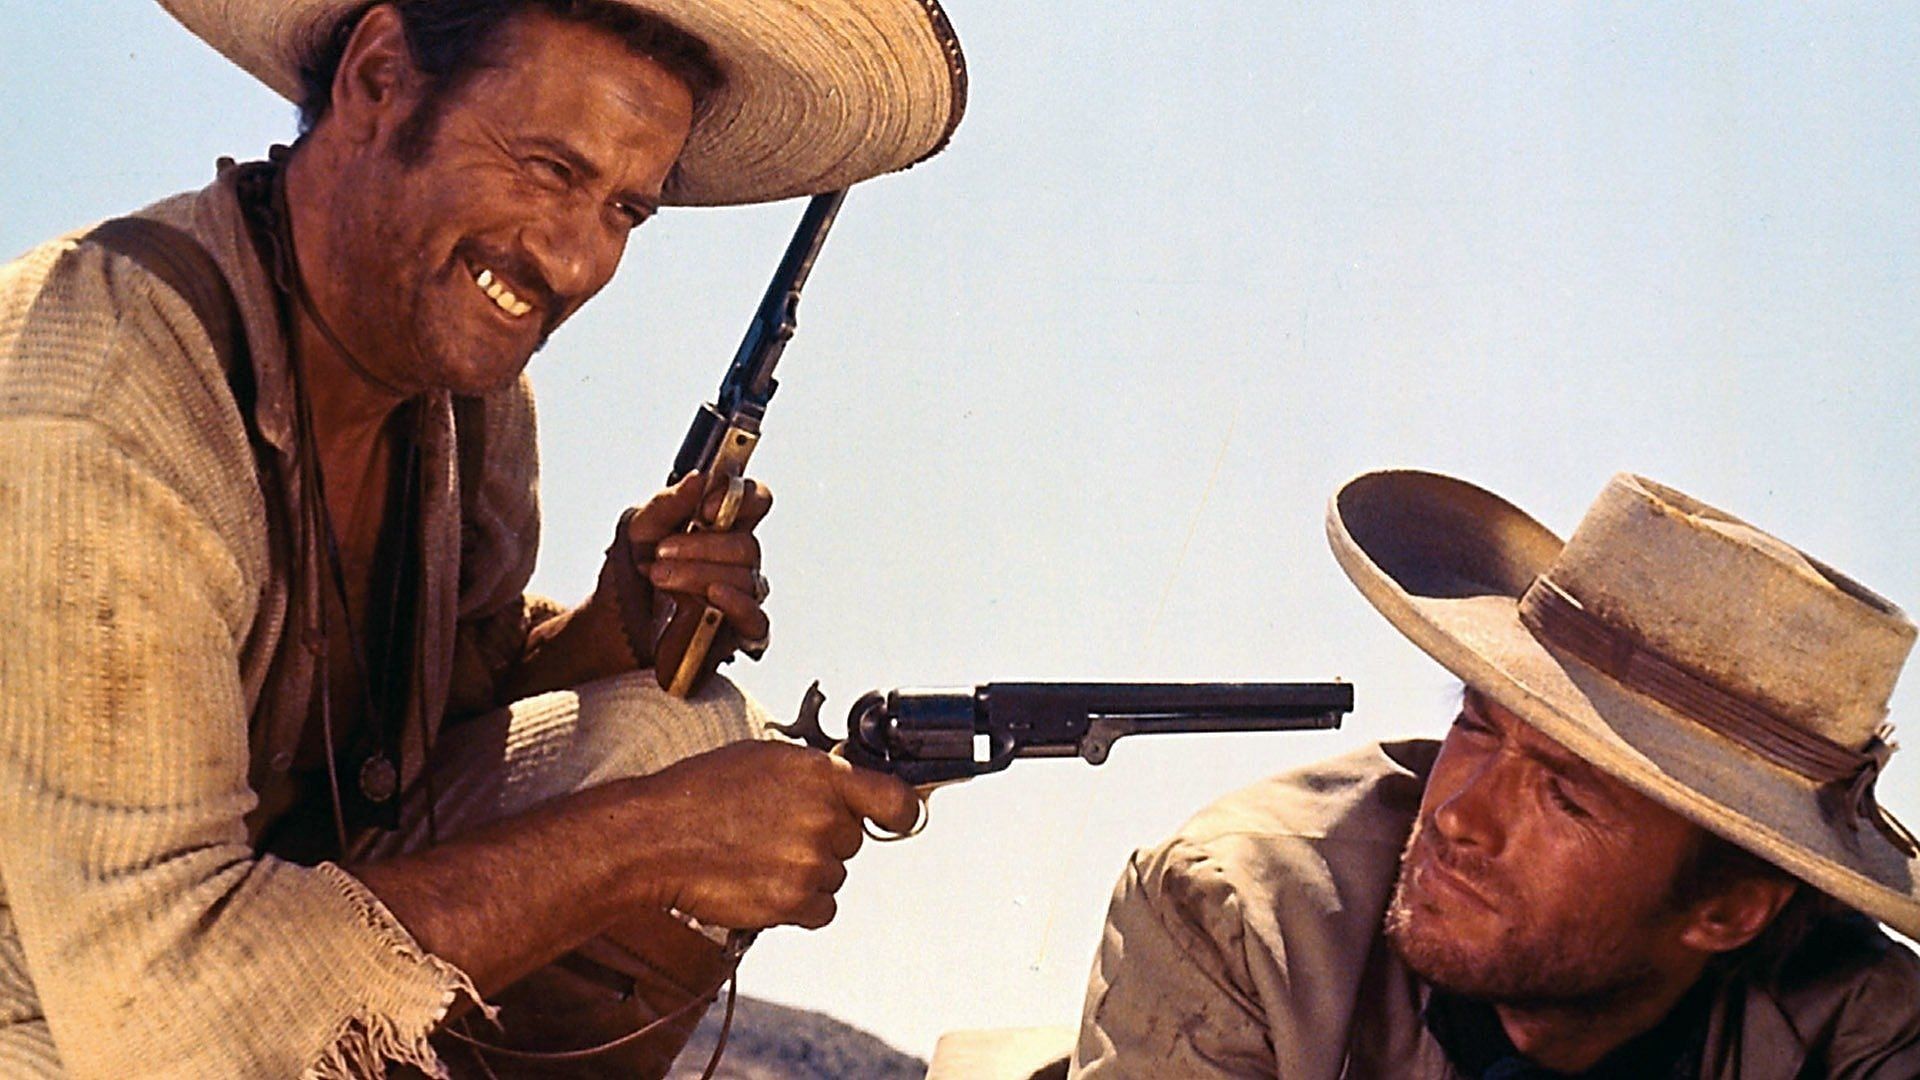 A still from The Good, the Bad, and the Ugly (Image via Paramount)